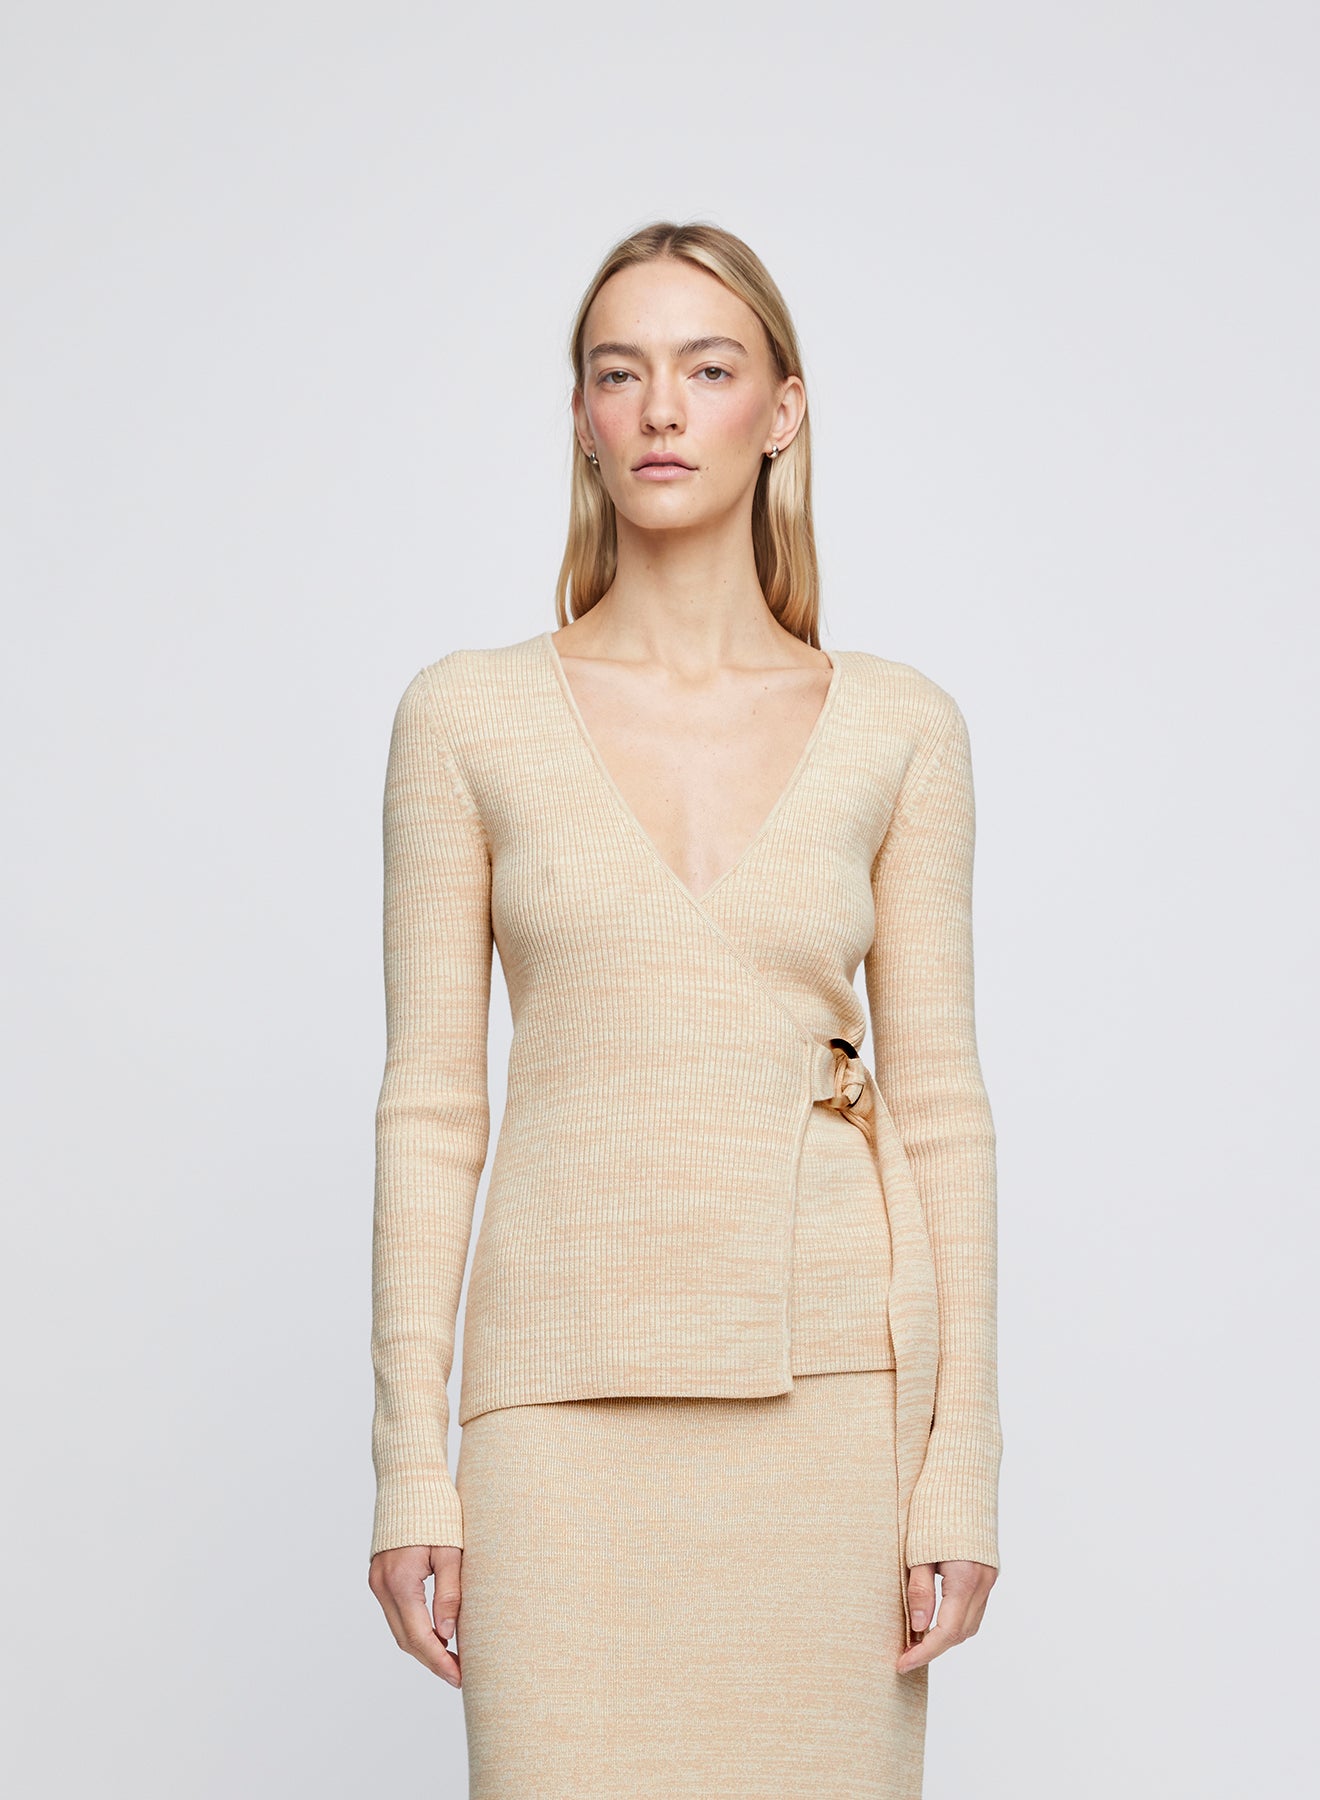 The Anna Quan Bonnie Top in Sand Dune is a classic long sleeve knitted top with a belt closure and deep v cut neckline.